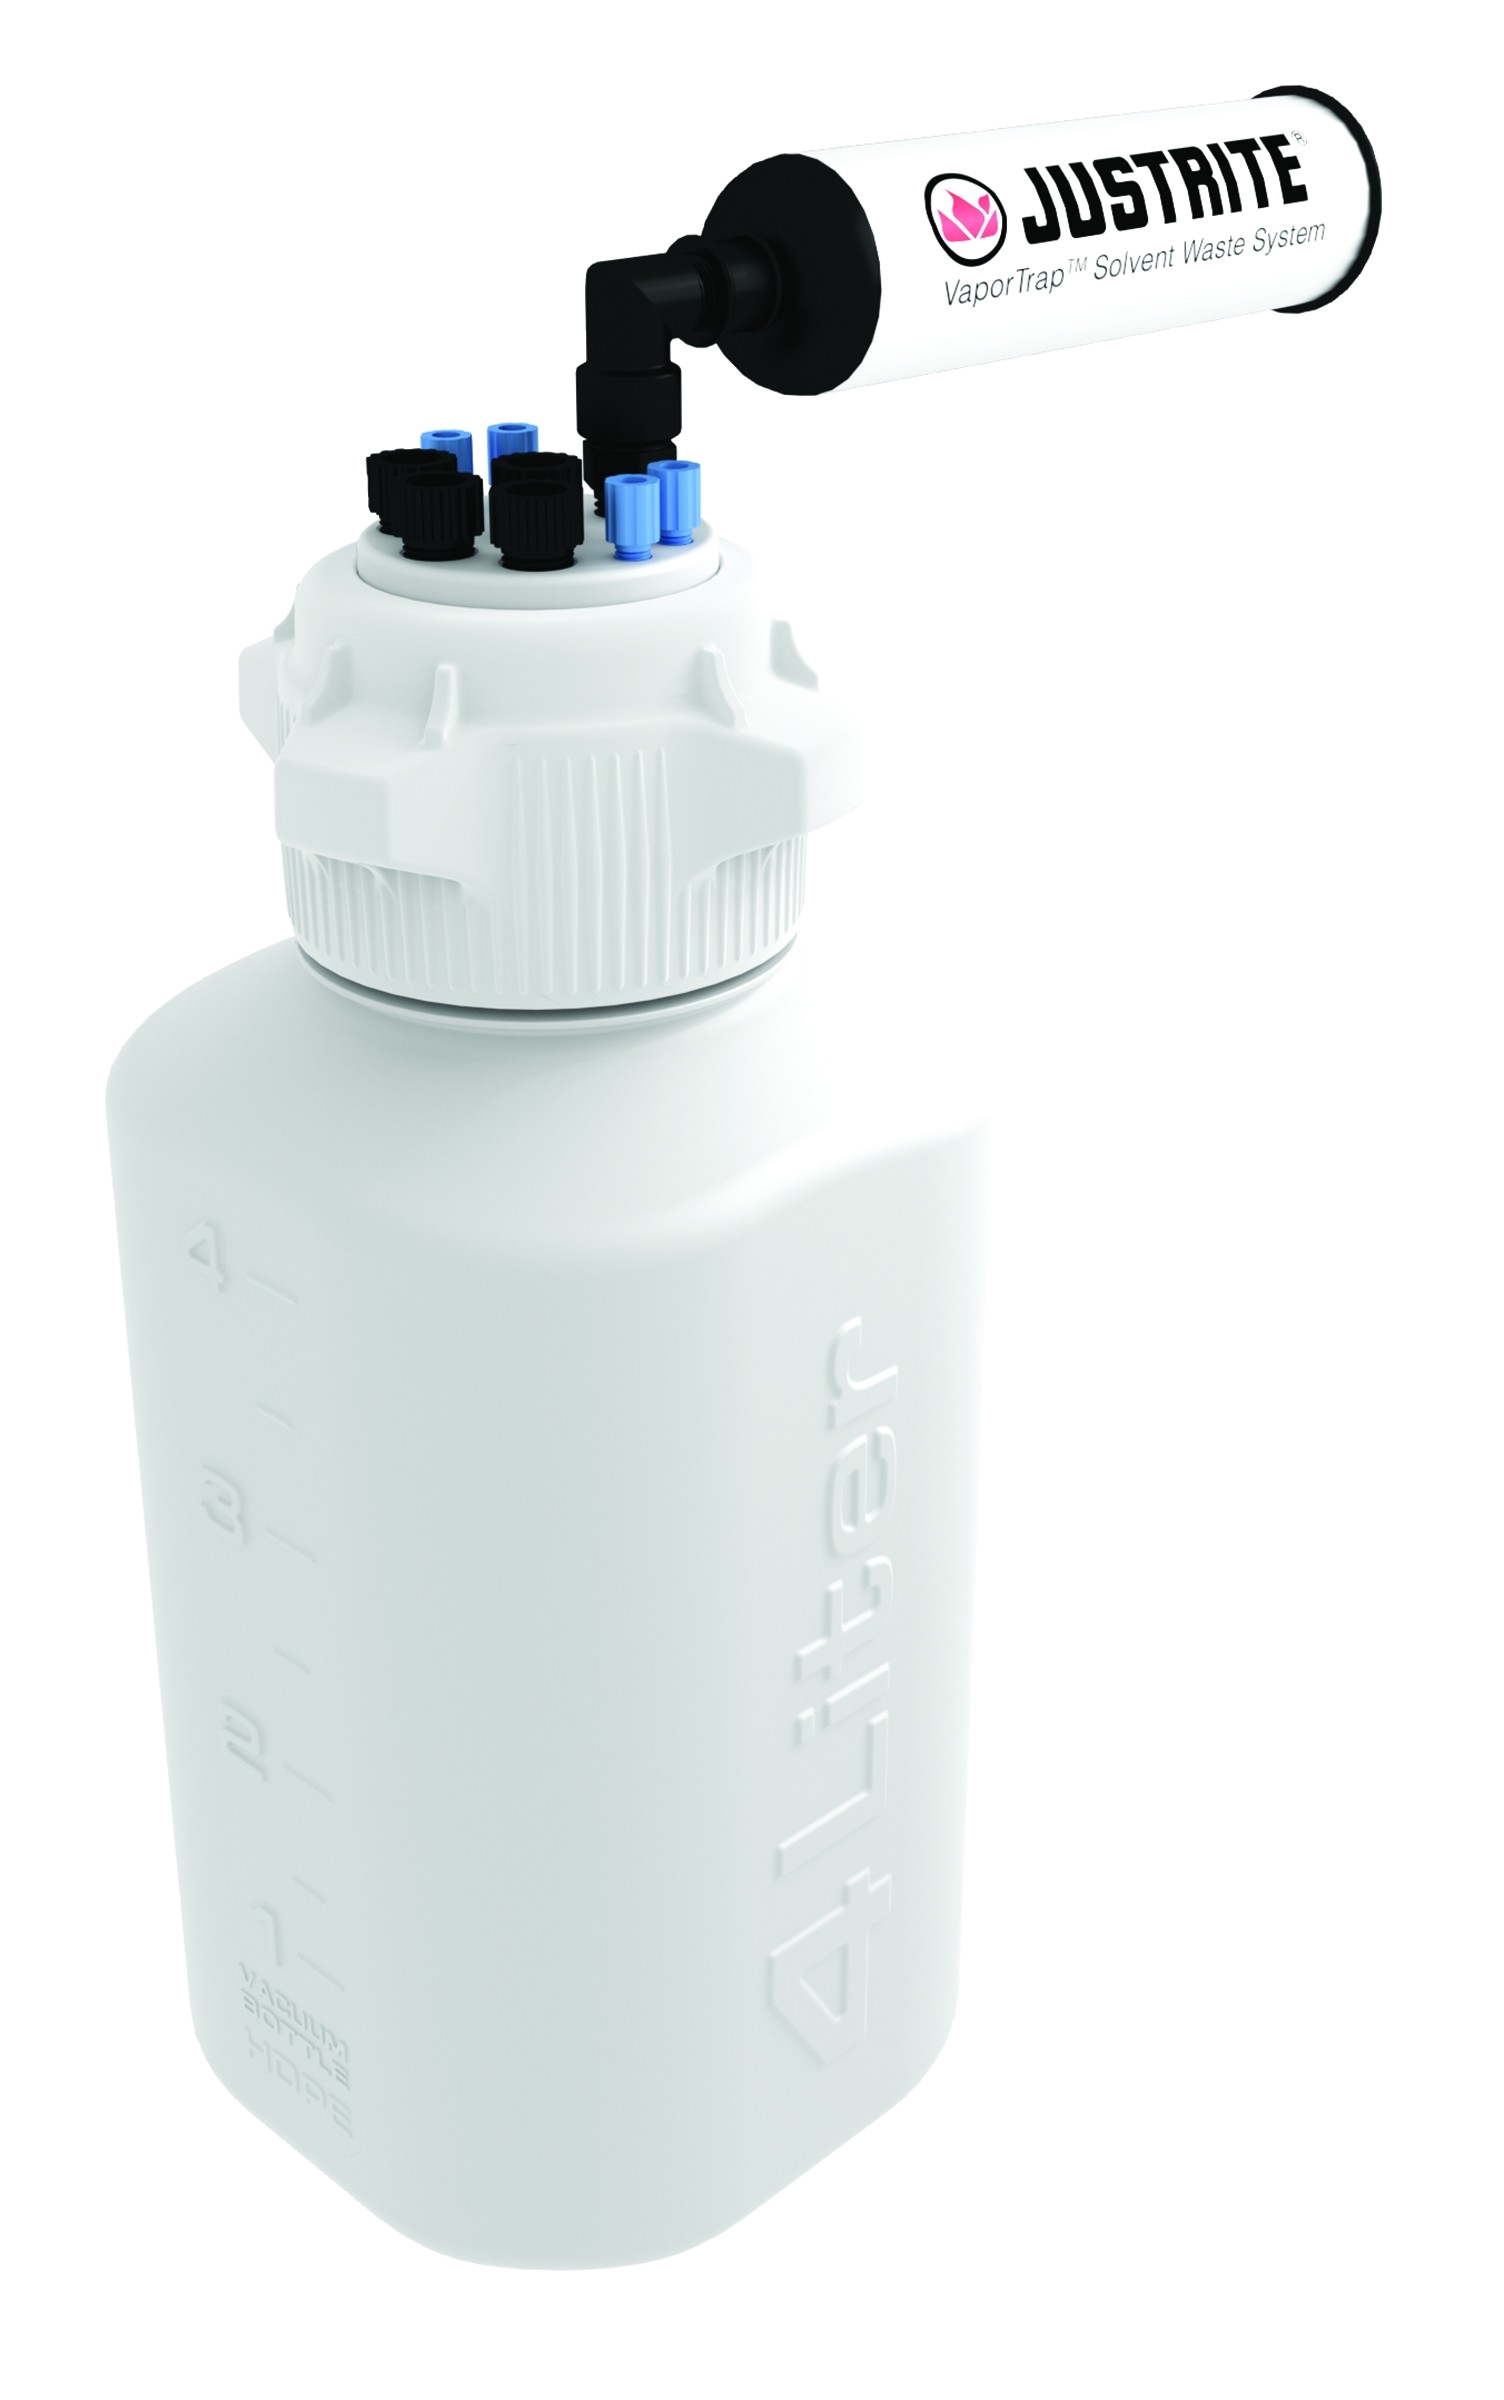 vaportrapa carboy with filter kit 4l hdpe 83mm cap 4 ports 1 8 od tubing 4 ports 1 4 od tubing